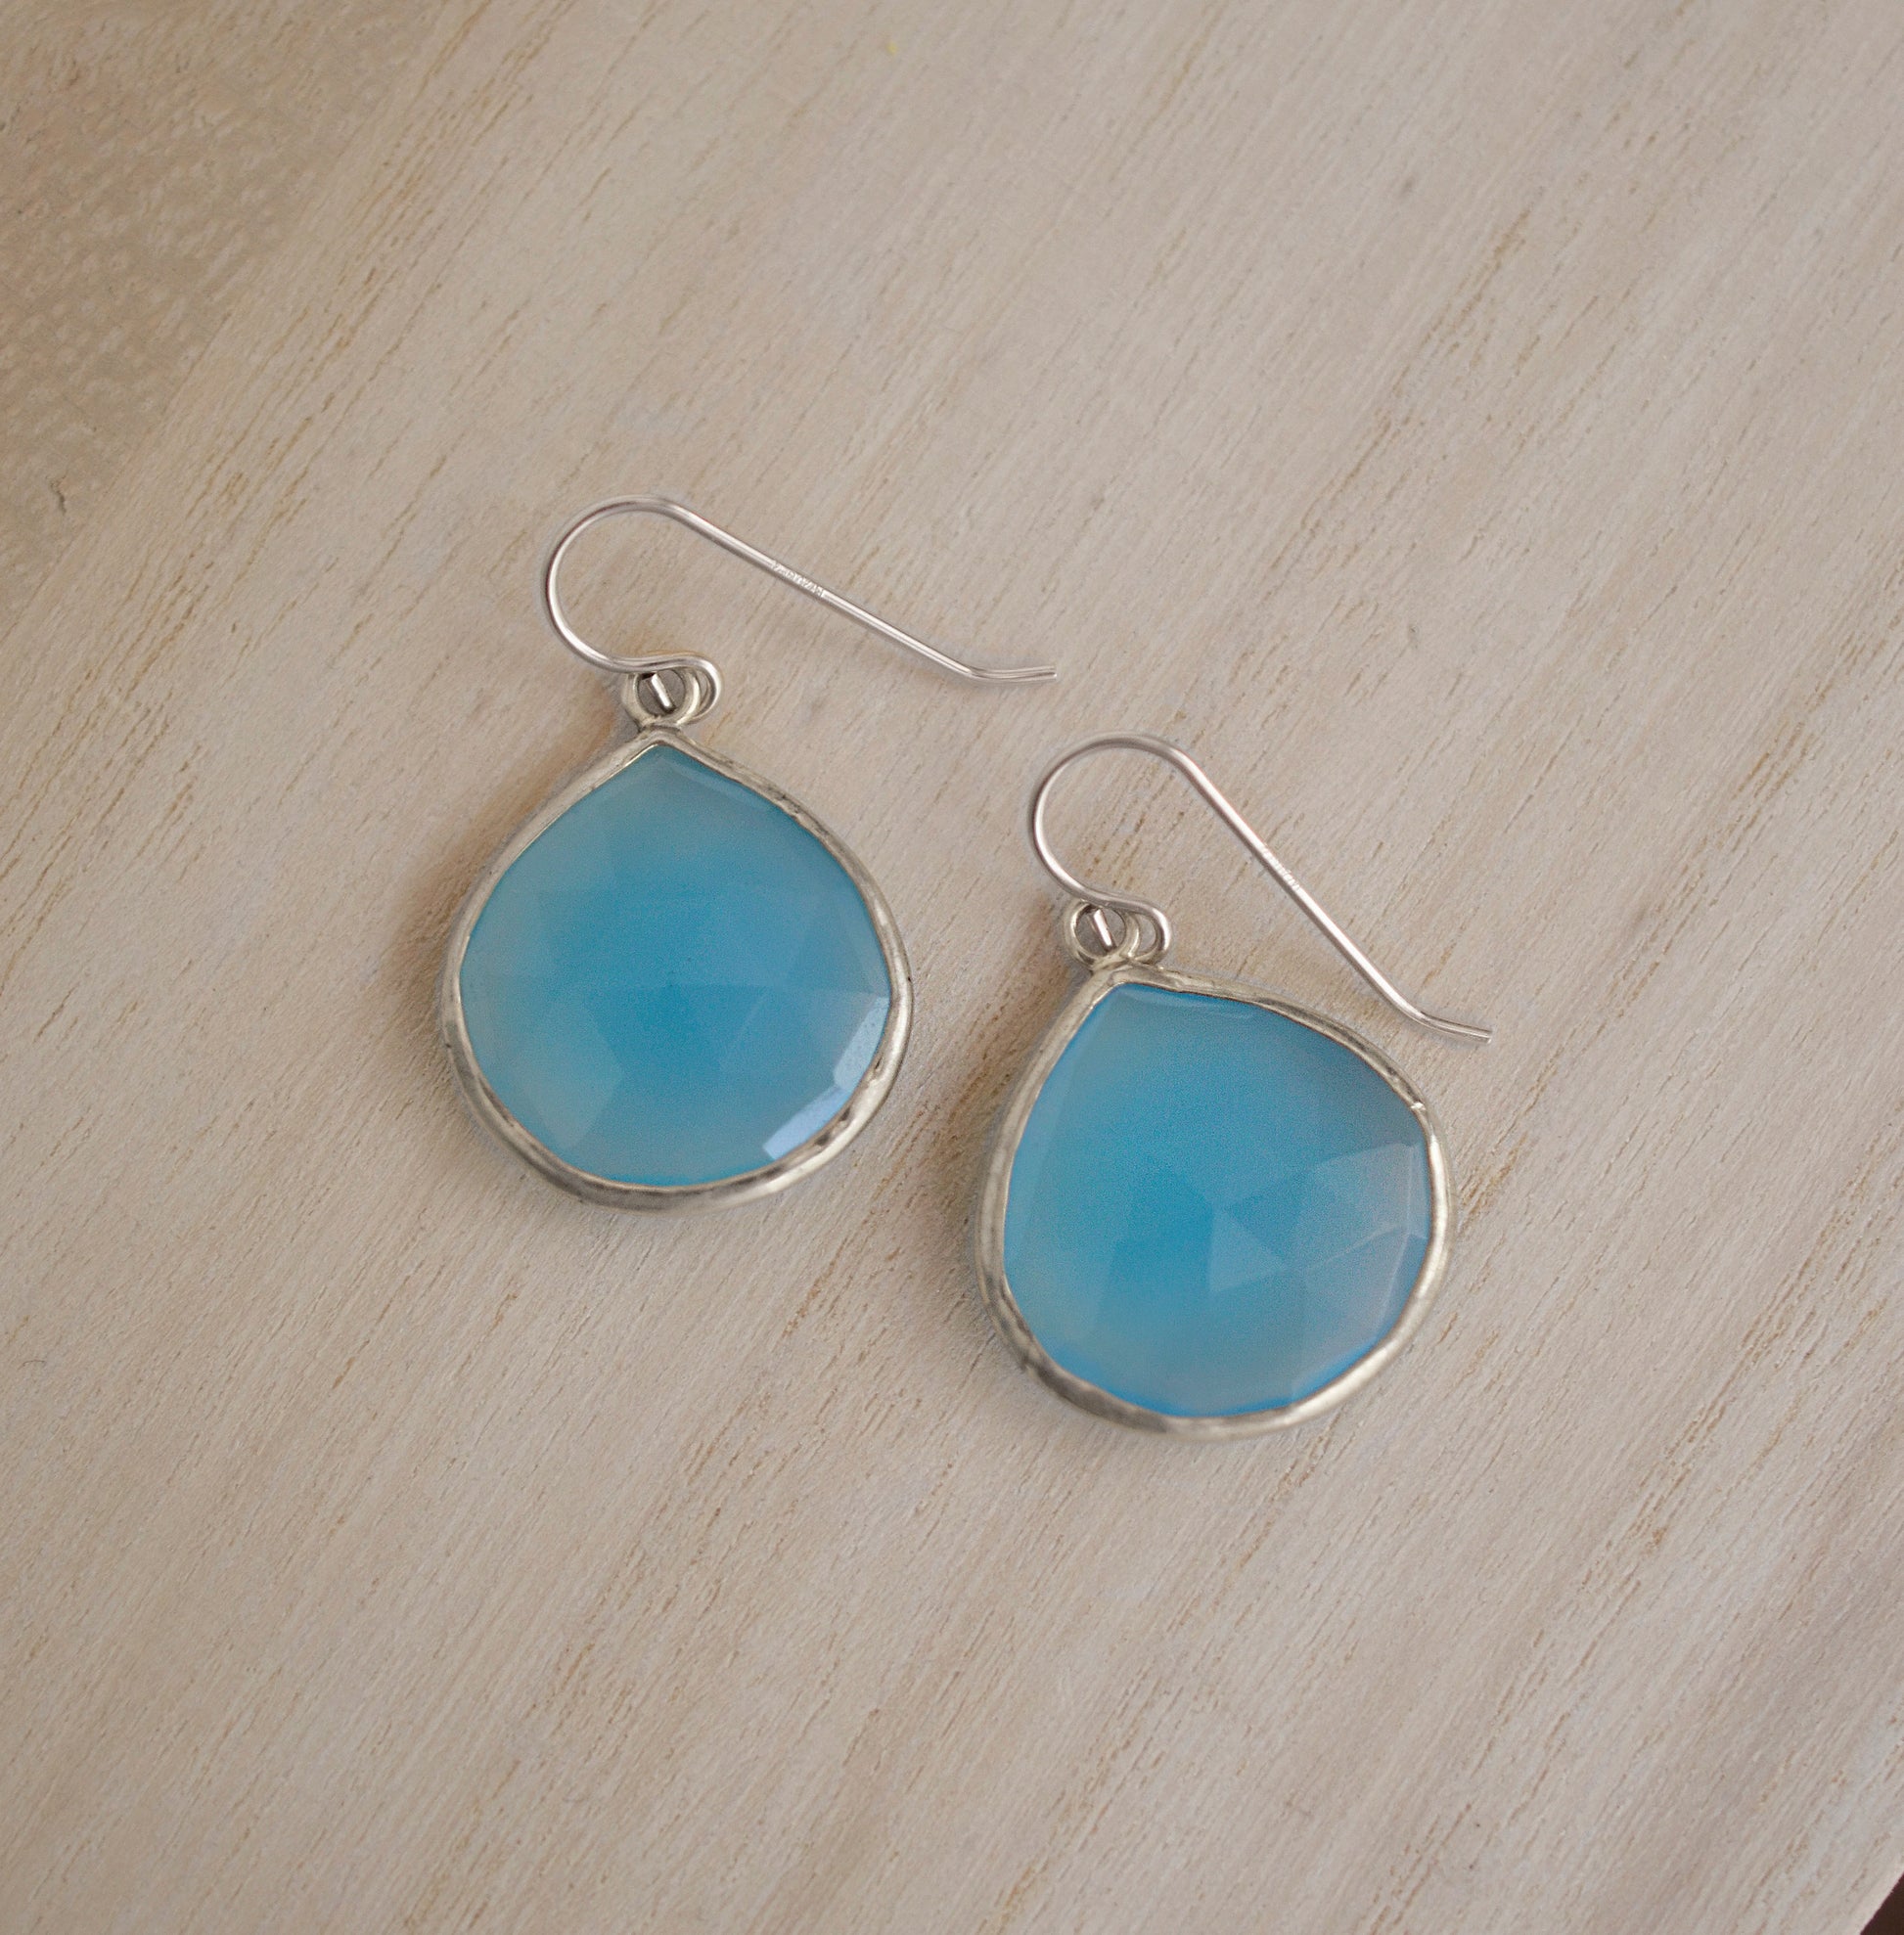 Large blue chalcedony teardrop gemstones bezeled in sterling silver and suspended from earwires. 